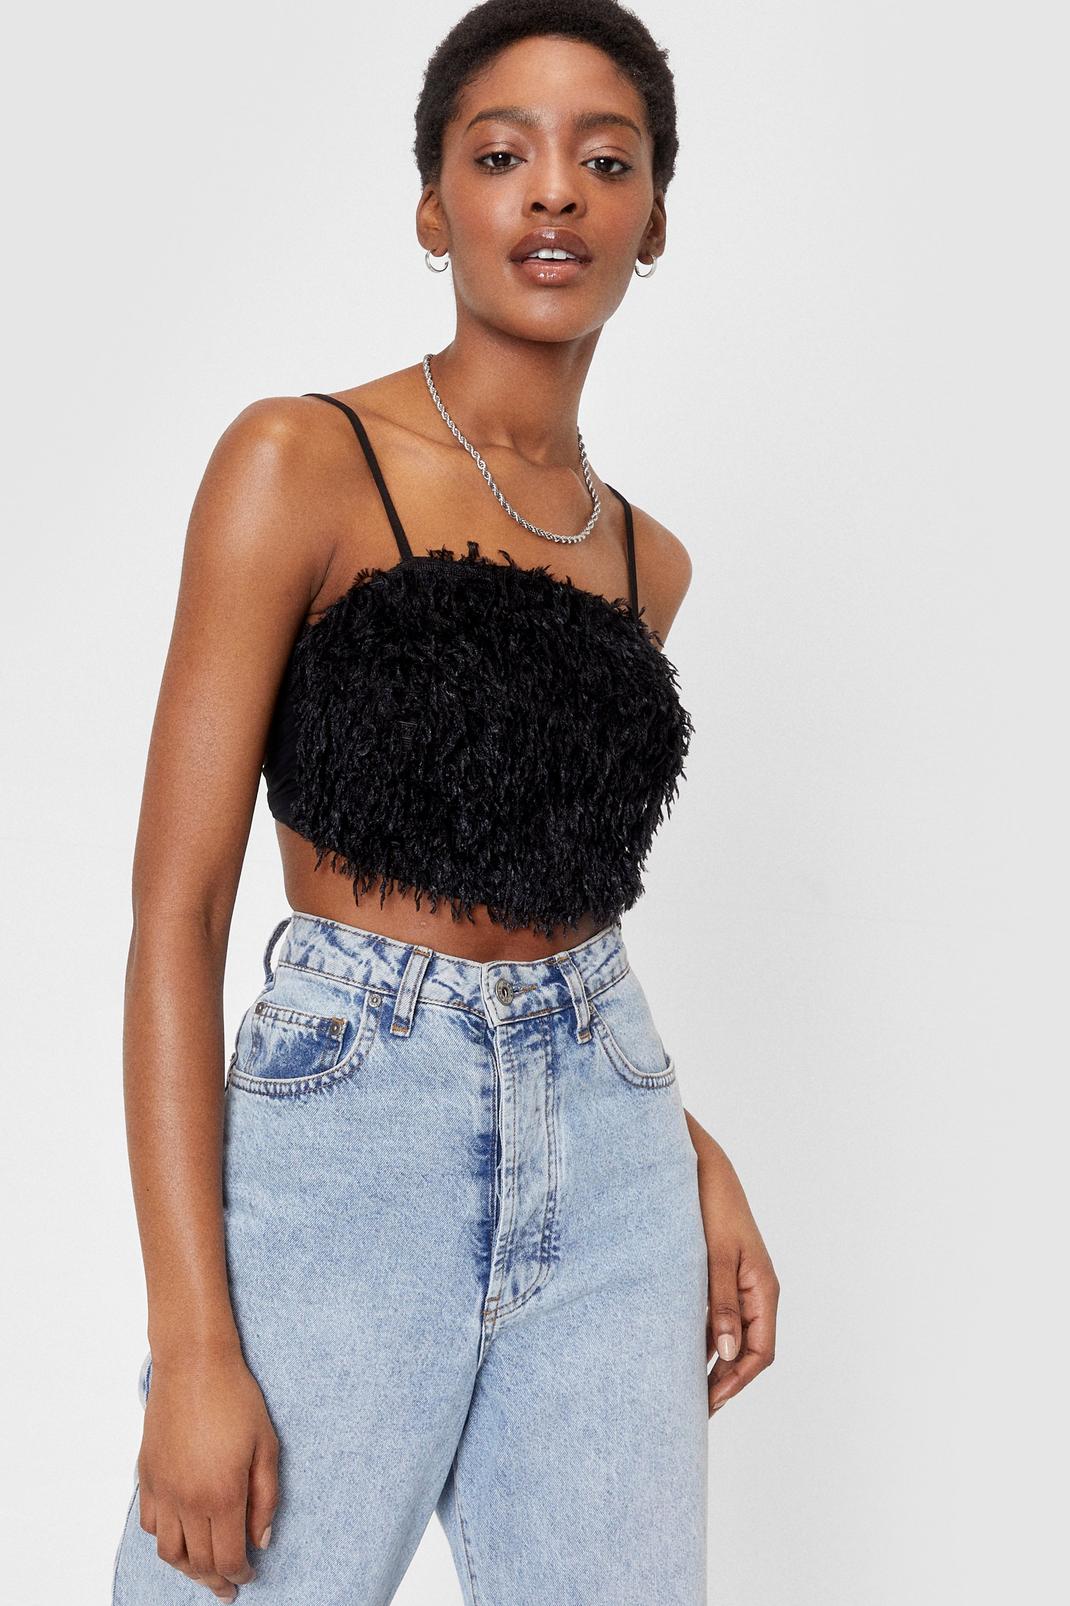 Find Me There Feather Crop Top- Black